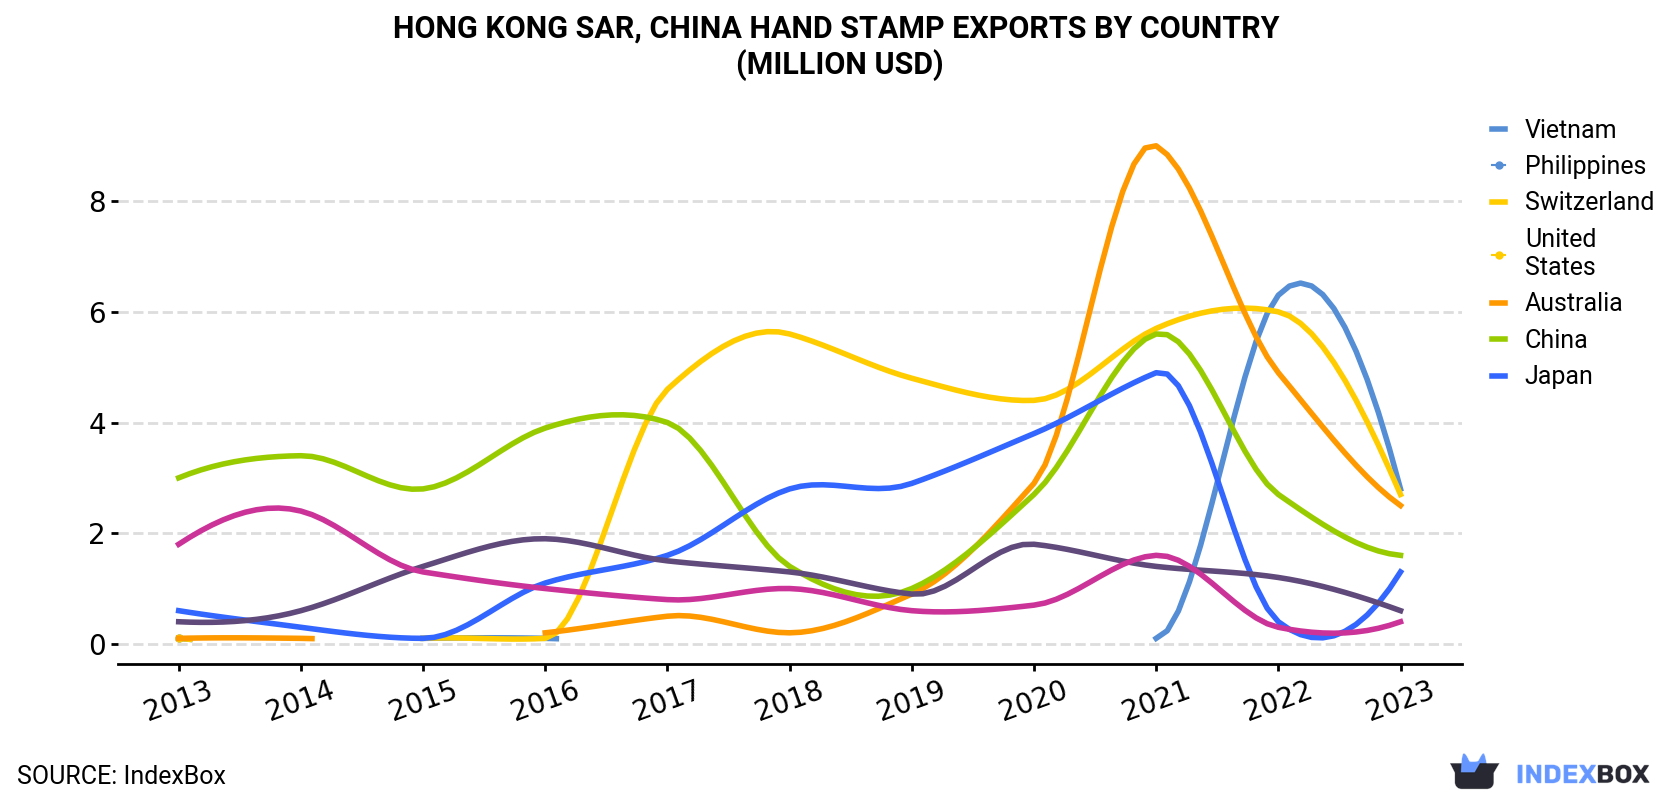 Hong Kong Hand Stamp Exports By Country (Million USD)